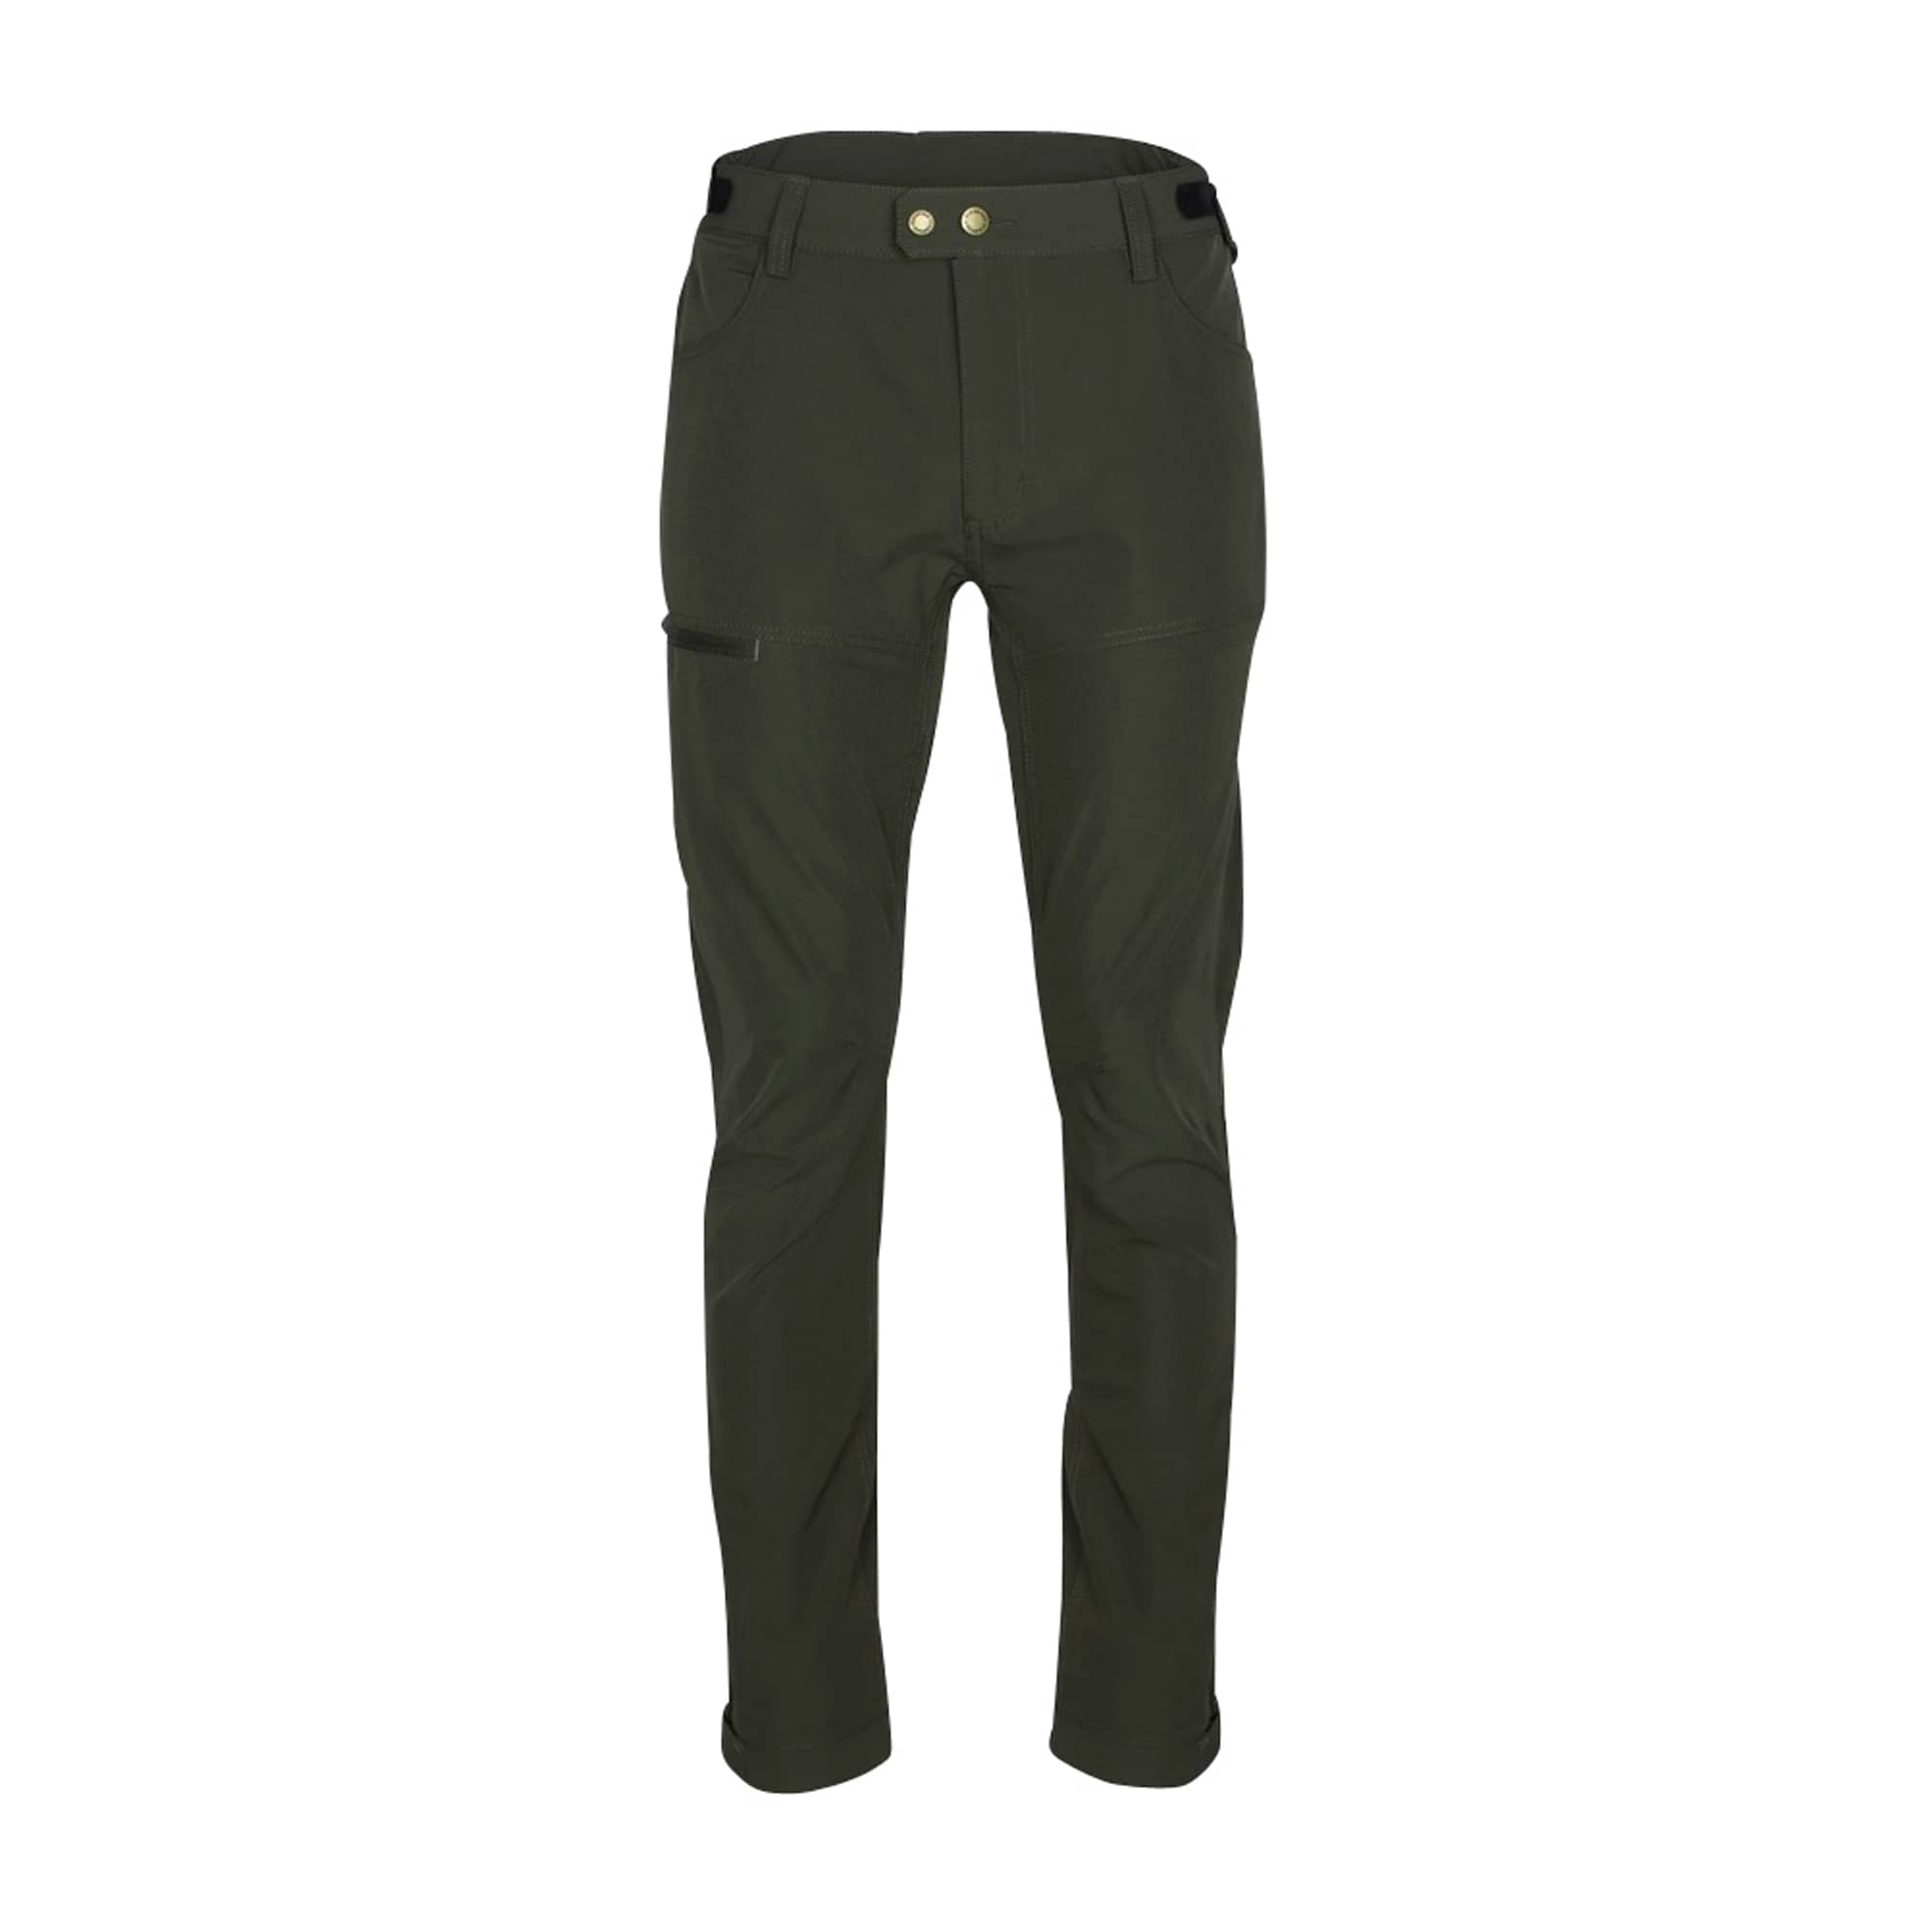 Purchase the Pinewood Pants Finnveden Trail Stretch dark green b